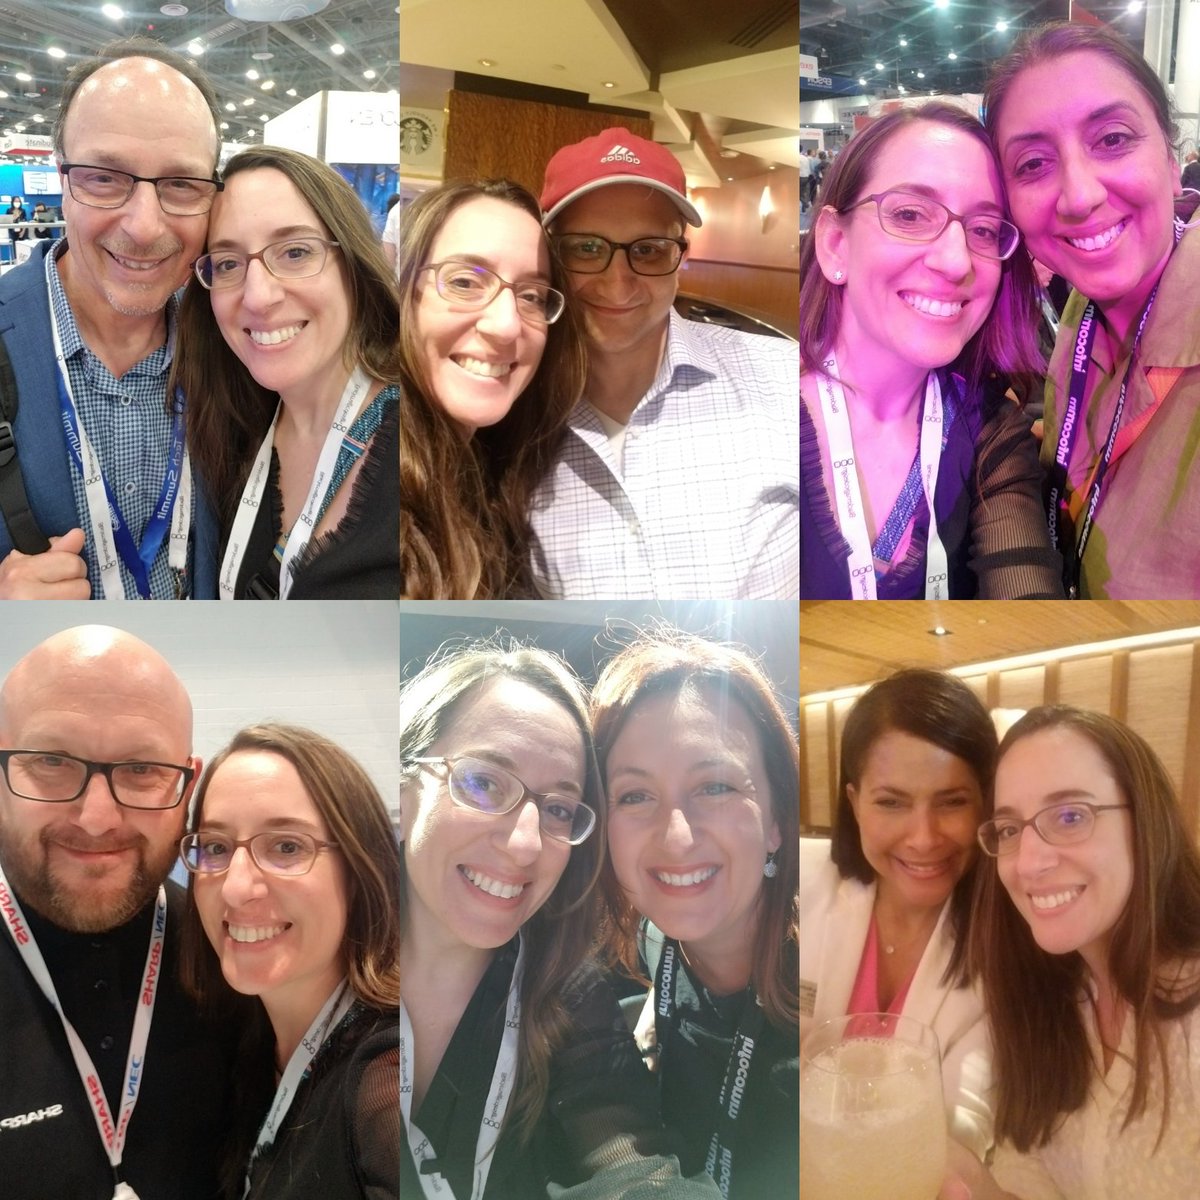 All the #avselfie shots from #infocomm22 
I know I've missed pictures and I KNOW I didn't tag everyone, but those drive by hugs were great 😁